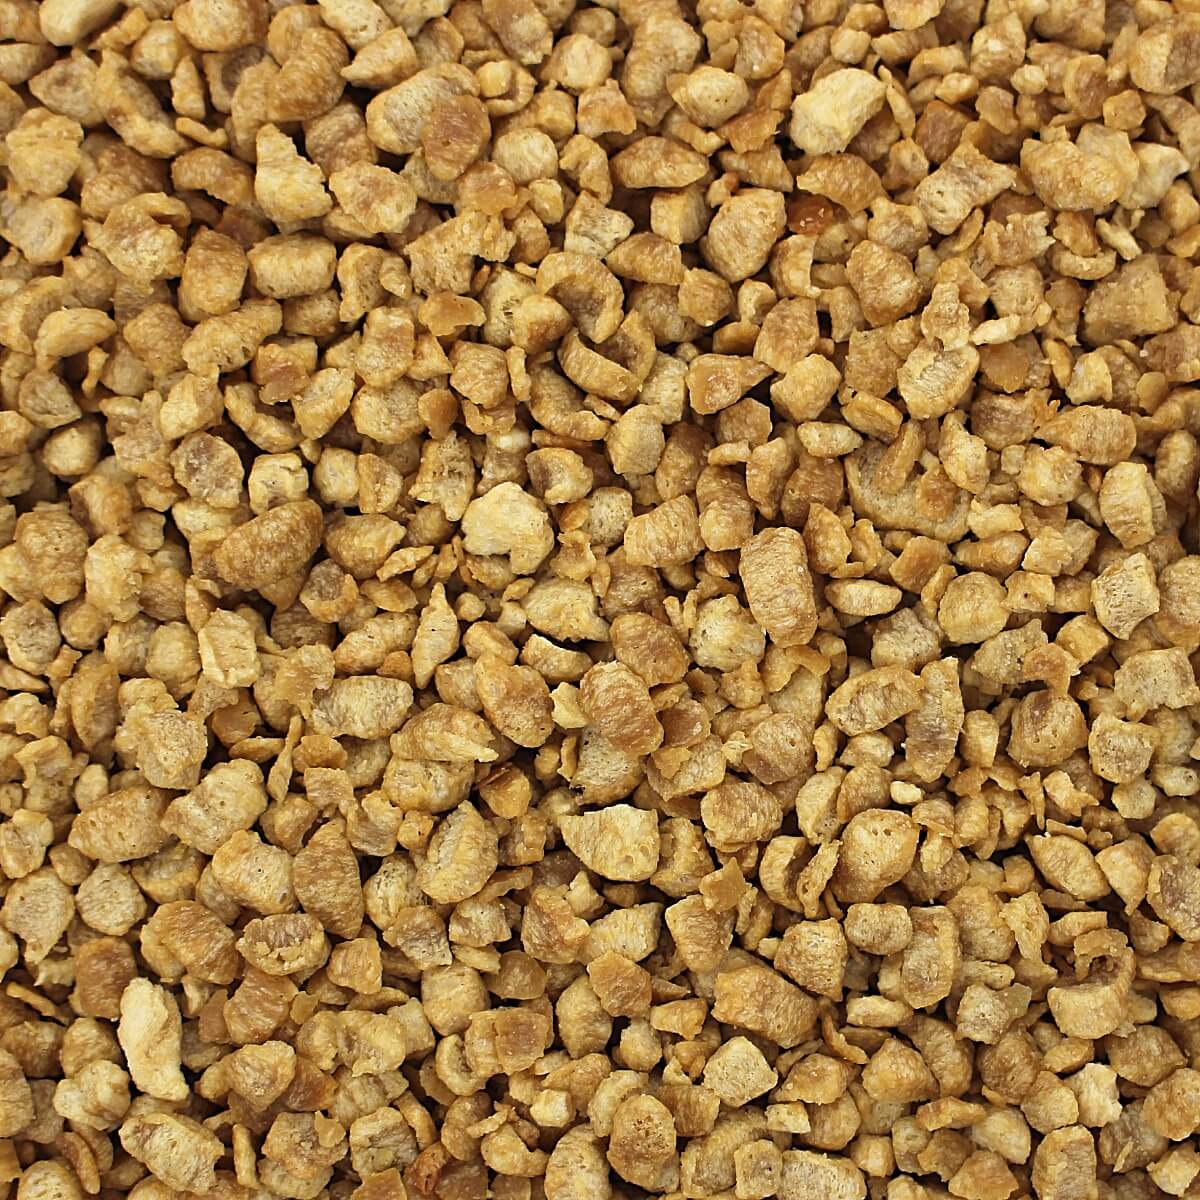 A close up image of a pile of Harmony House Chicken Flavored Bits.